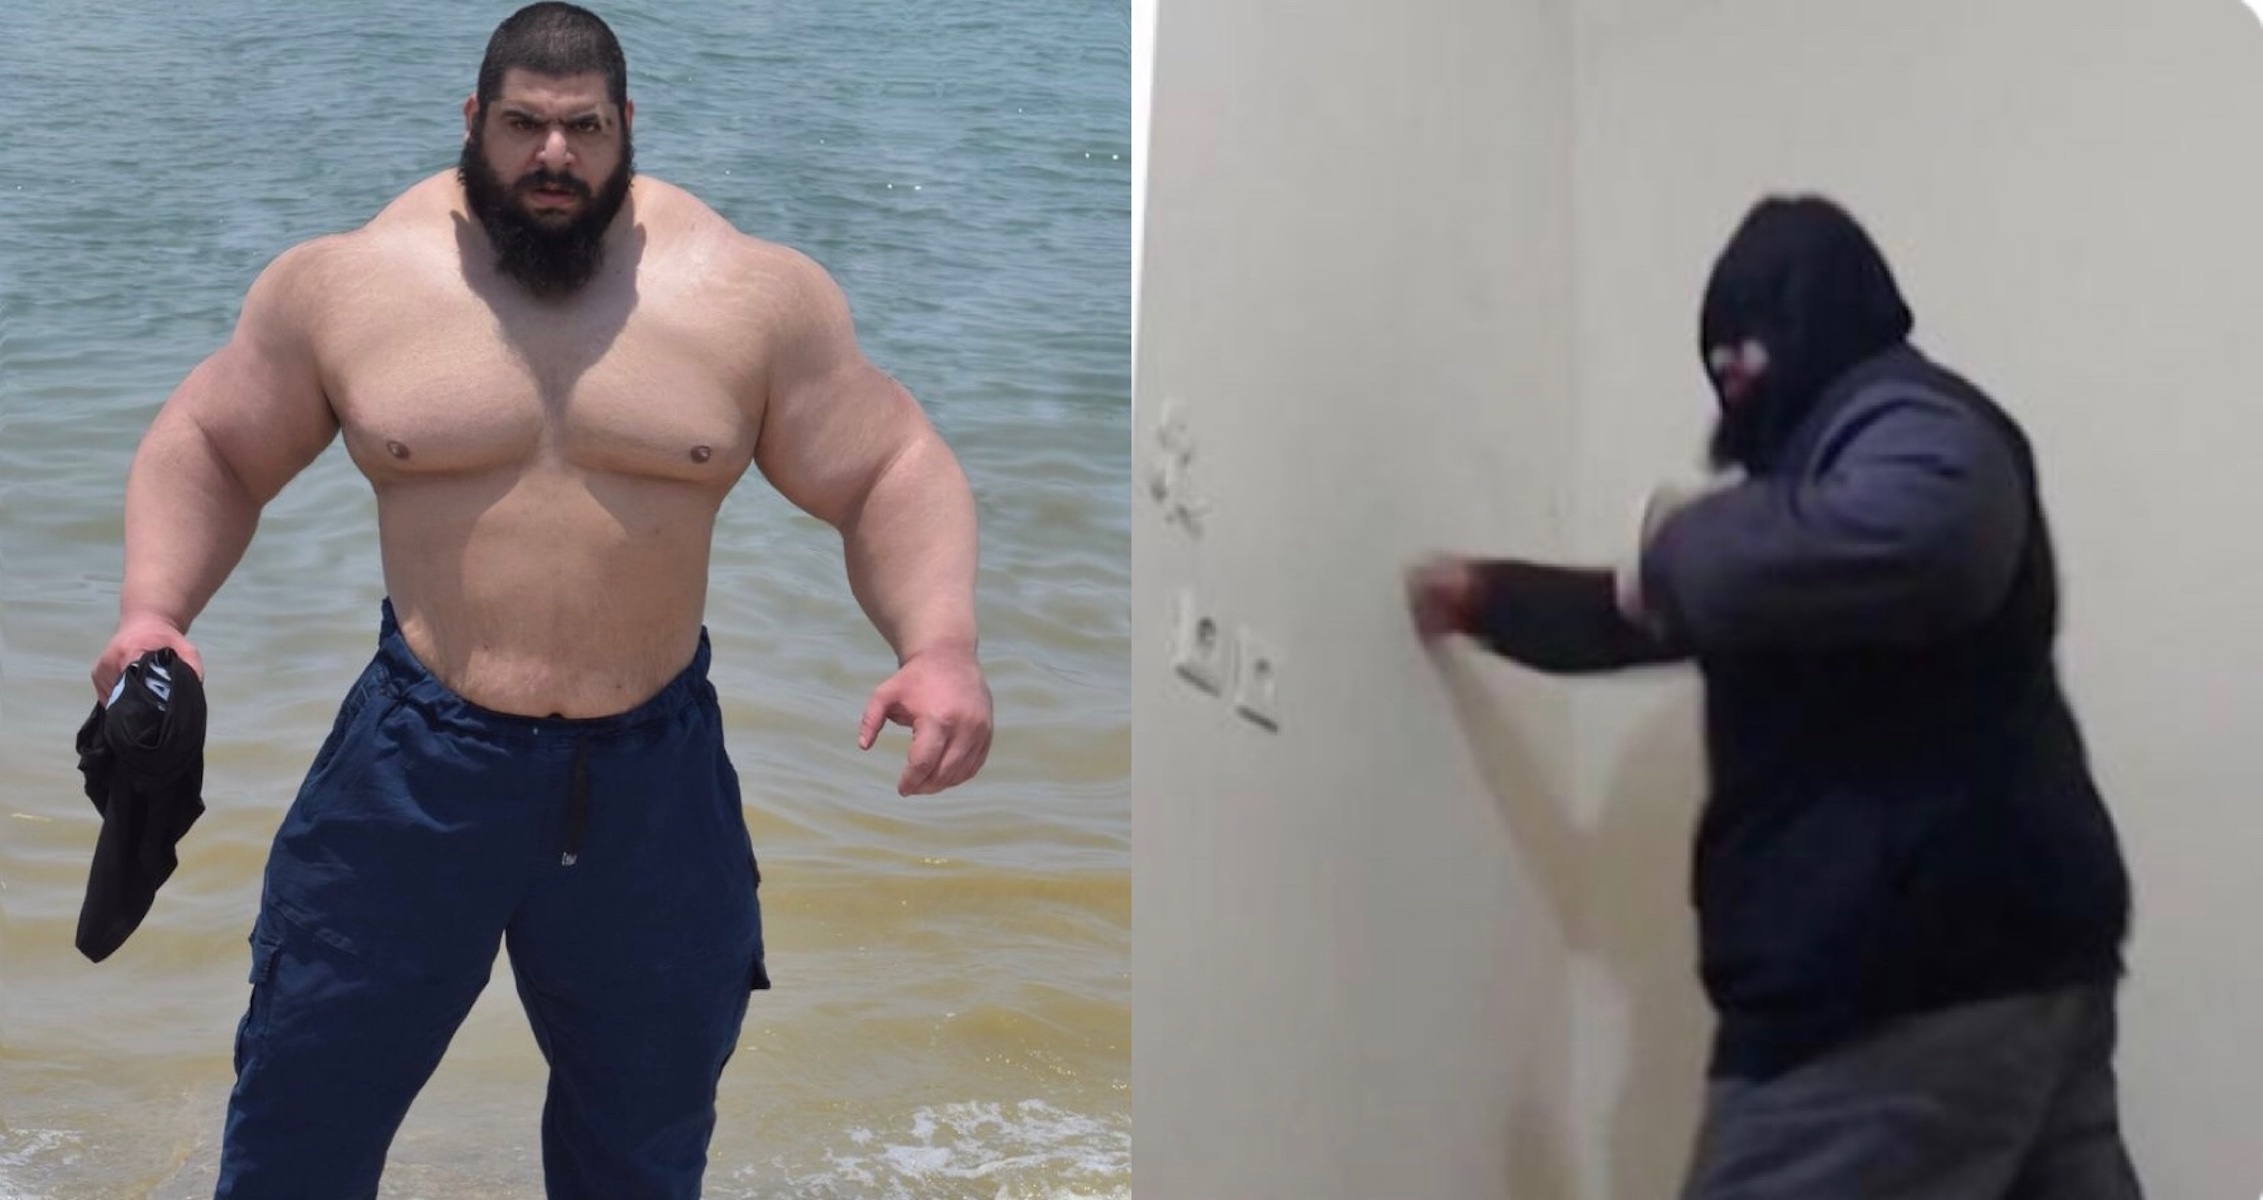 The ‘Iranian Hulk’ Is Preparing For Boxing Match Against Martyn Ford By Punching Walls